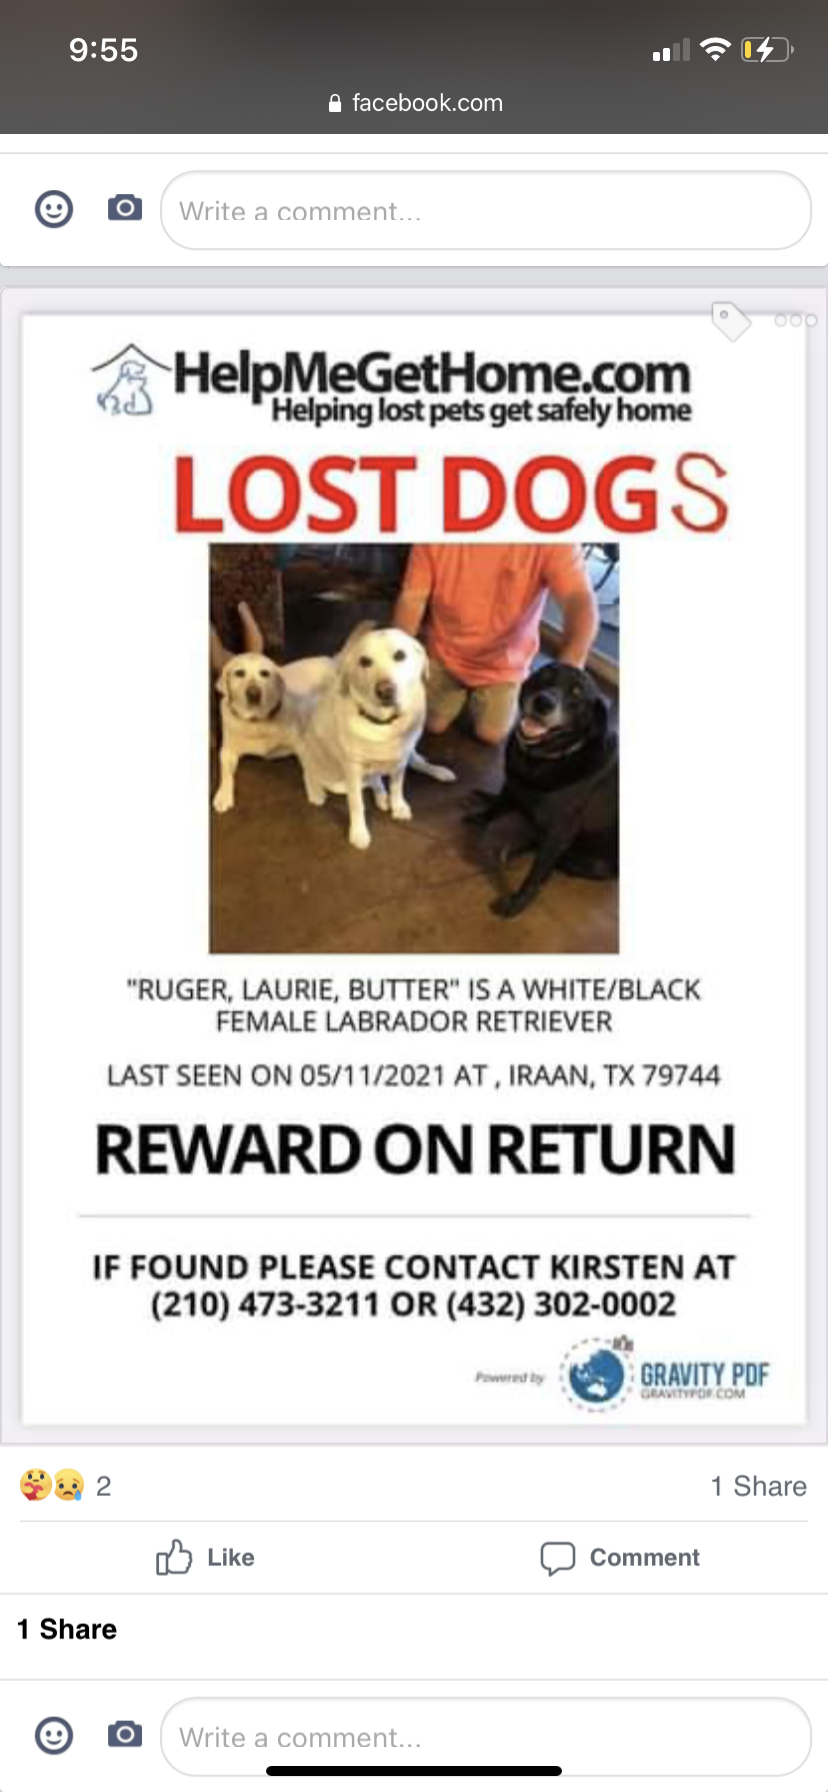 Image of RueLaurieButtwr, Lost Dog